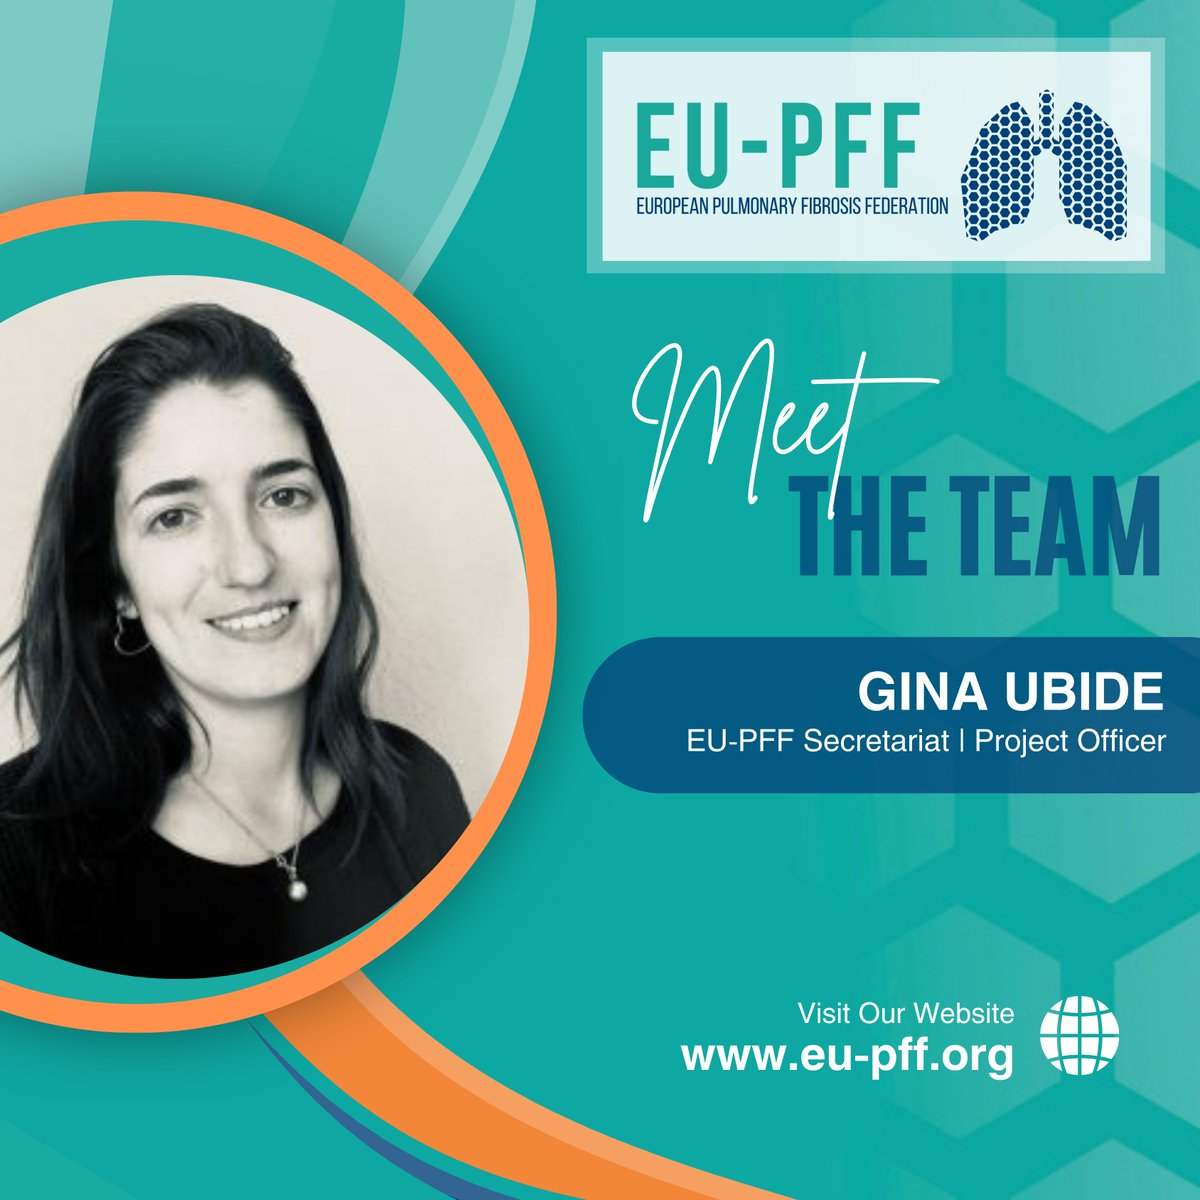 Gina Ubide complements the EU-PFF Secretariat with her wide range of skills. From supporting the team with administrative tasks to project management, logistics and communication work – she is instrumental in every task and project. Thank you, Gina! #MeetTheTeam